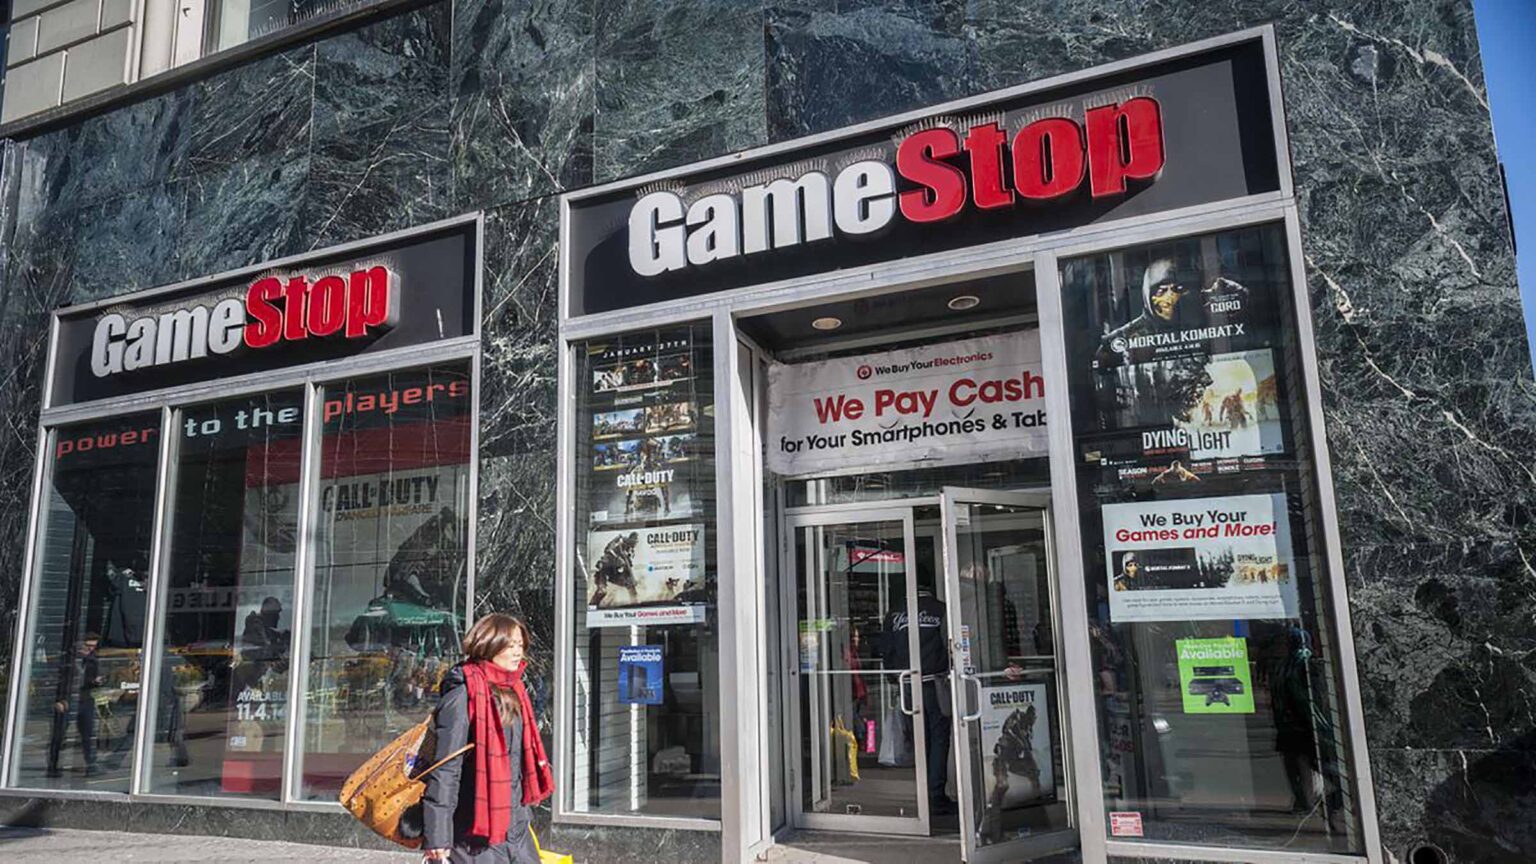 A Wall Street war rages over GameStop as stock prices soar. Could this save the company or become another dot.com debacle?